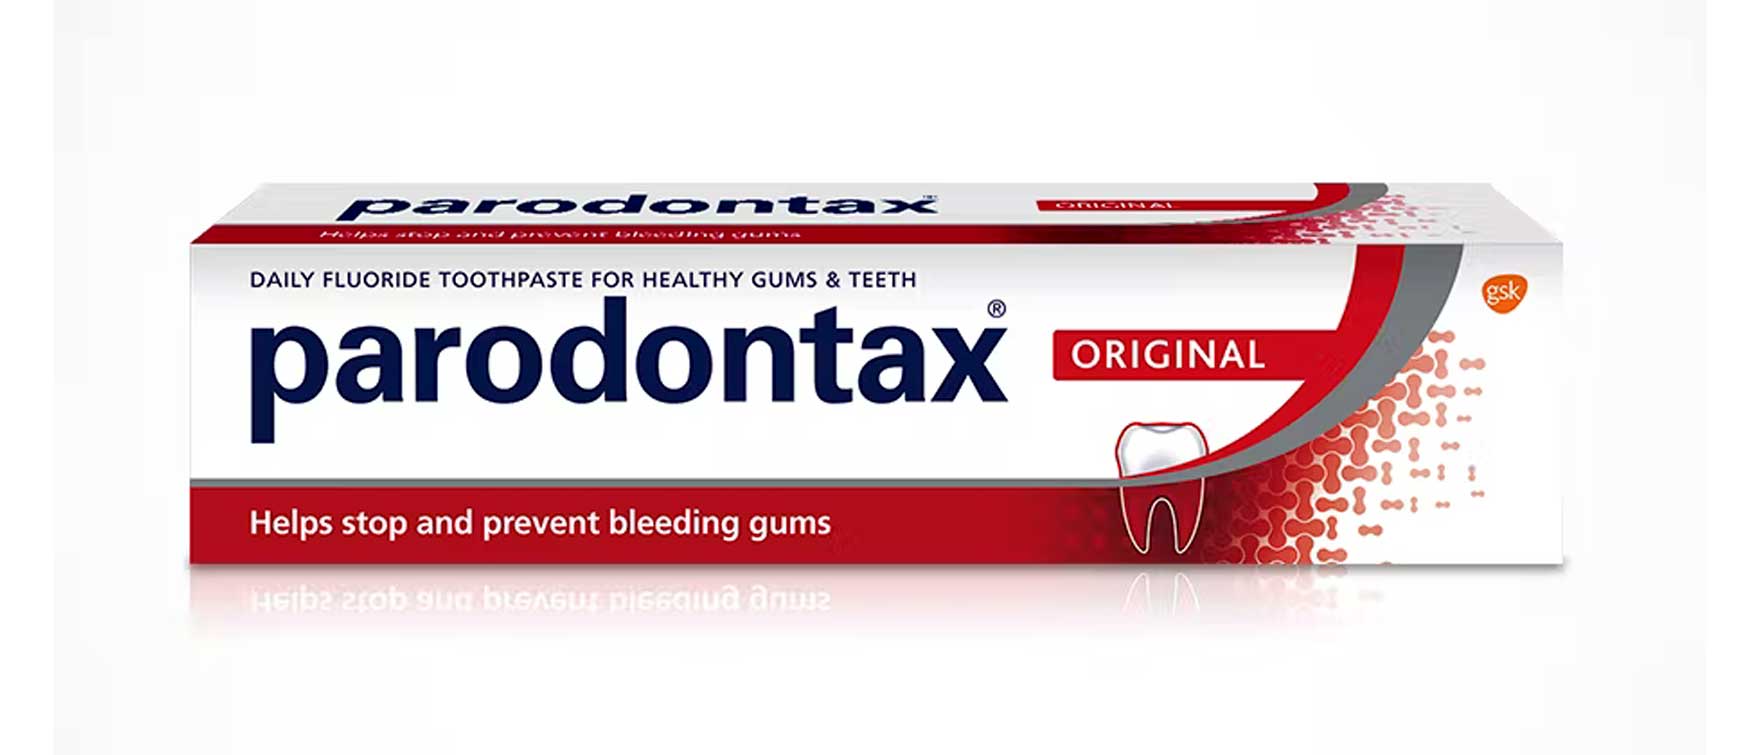 11. Parodontax Toothpaste for Bleeding Gums and Gingivitis